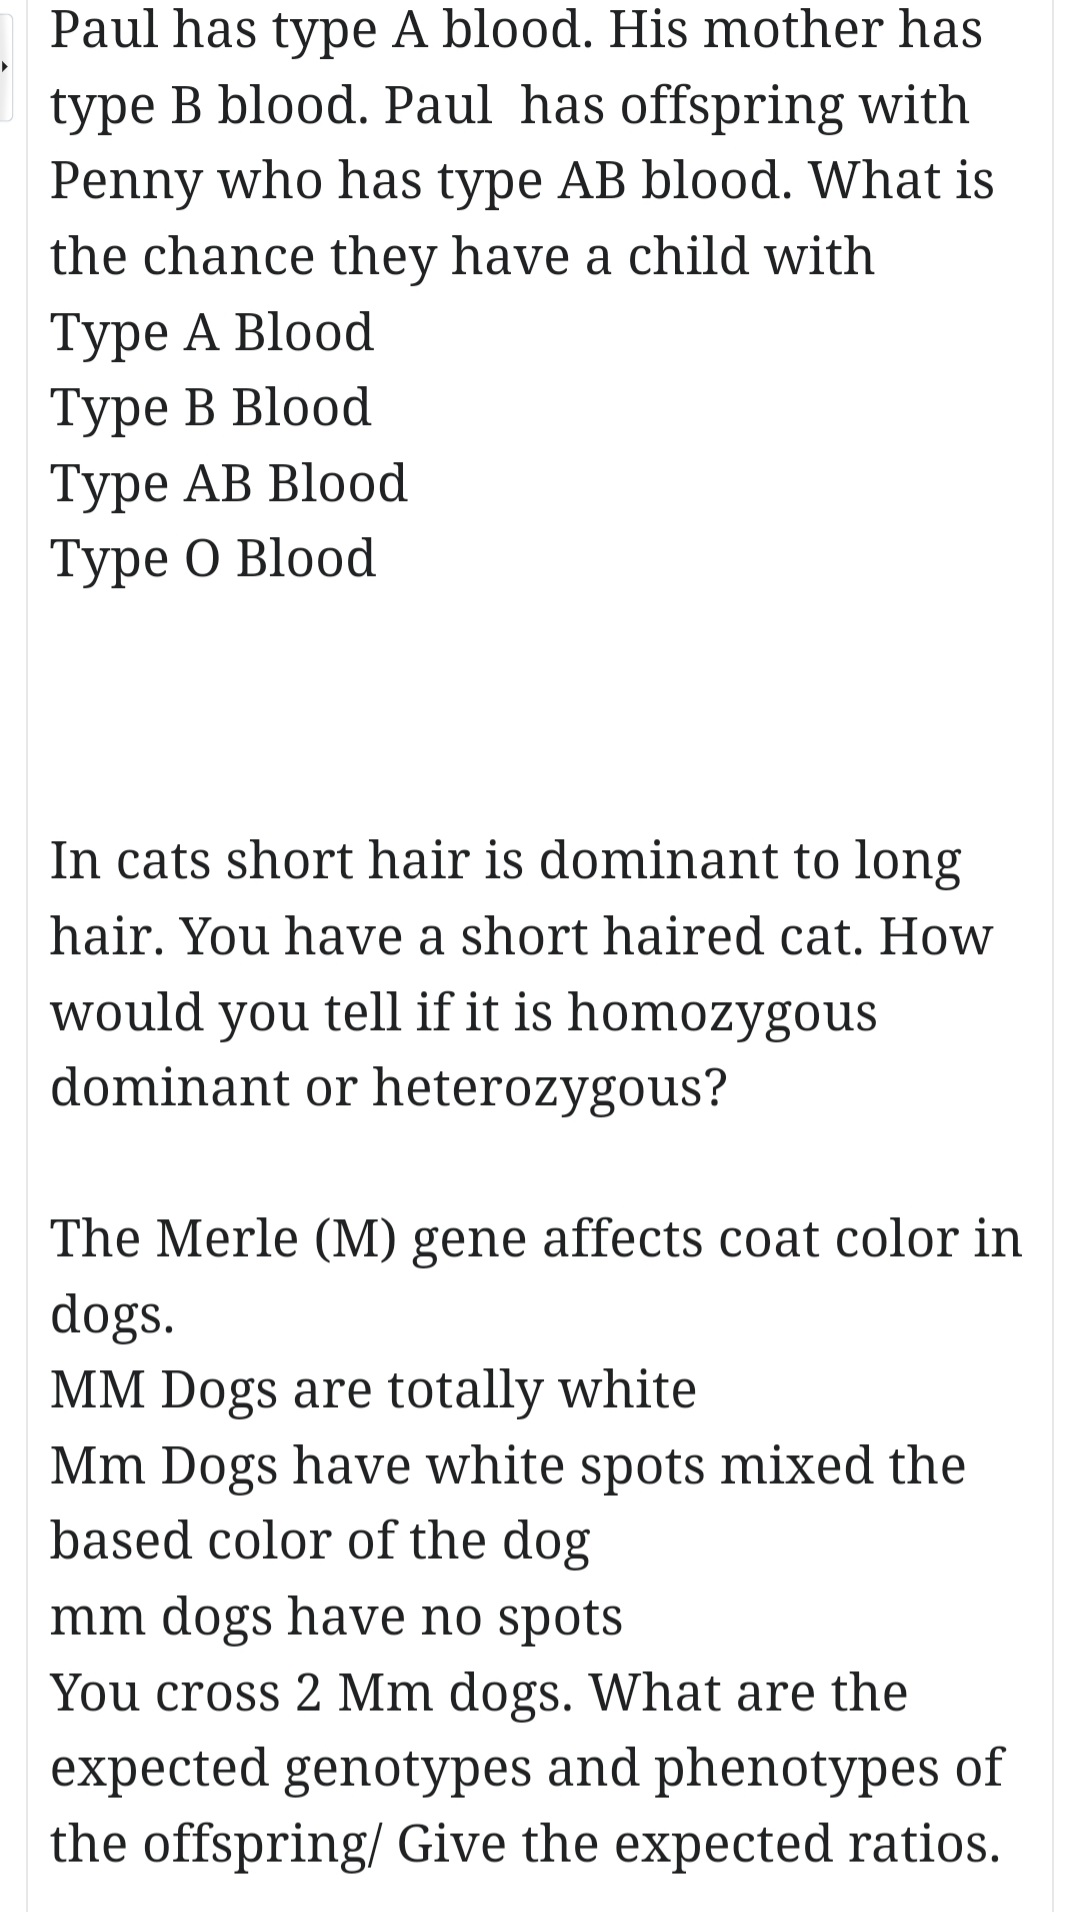 Paul has type A blood. His mother has
type B blood. Paul has offspring with
Penny who has type AB blood. What is
the chance they have a child with
Type A Blood
Type B Blood
Type AB Blood
Type O Blood
In cats short hair is dominant to long
hair. You have a short haired cat. How
would you tell if it is homozygous
dominant or heterozygous?
The Merle (M) gene affects coat color in
dogs.
MM Dogs are totally white
Mm Dogs have white spots mixed the
based color of the dog
mm dogs have no spots
You cross 2 Mm dogs. What are the
expected genotypes and phenotypes of
the offspring/ Give the expected ratios.